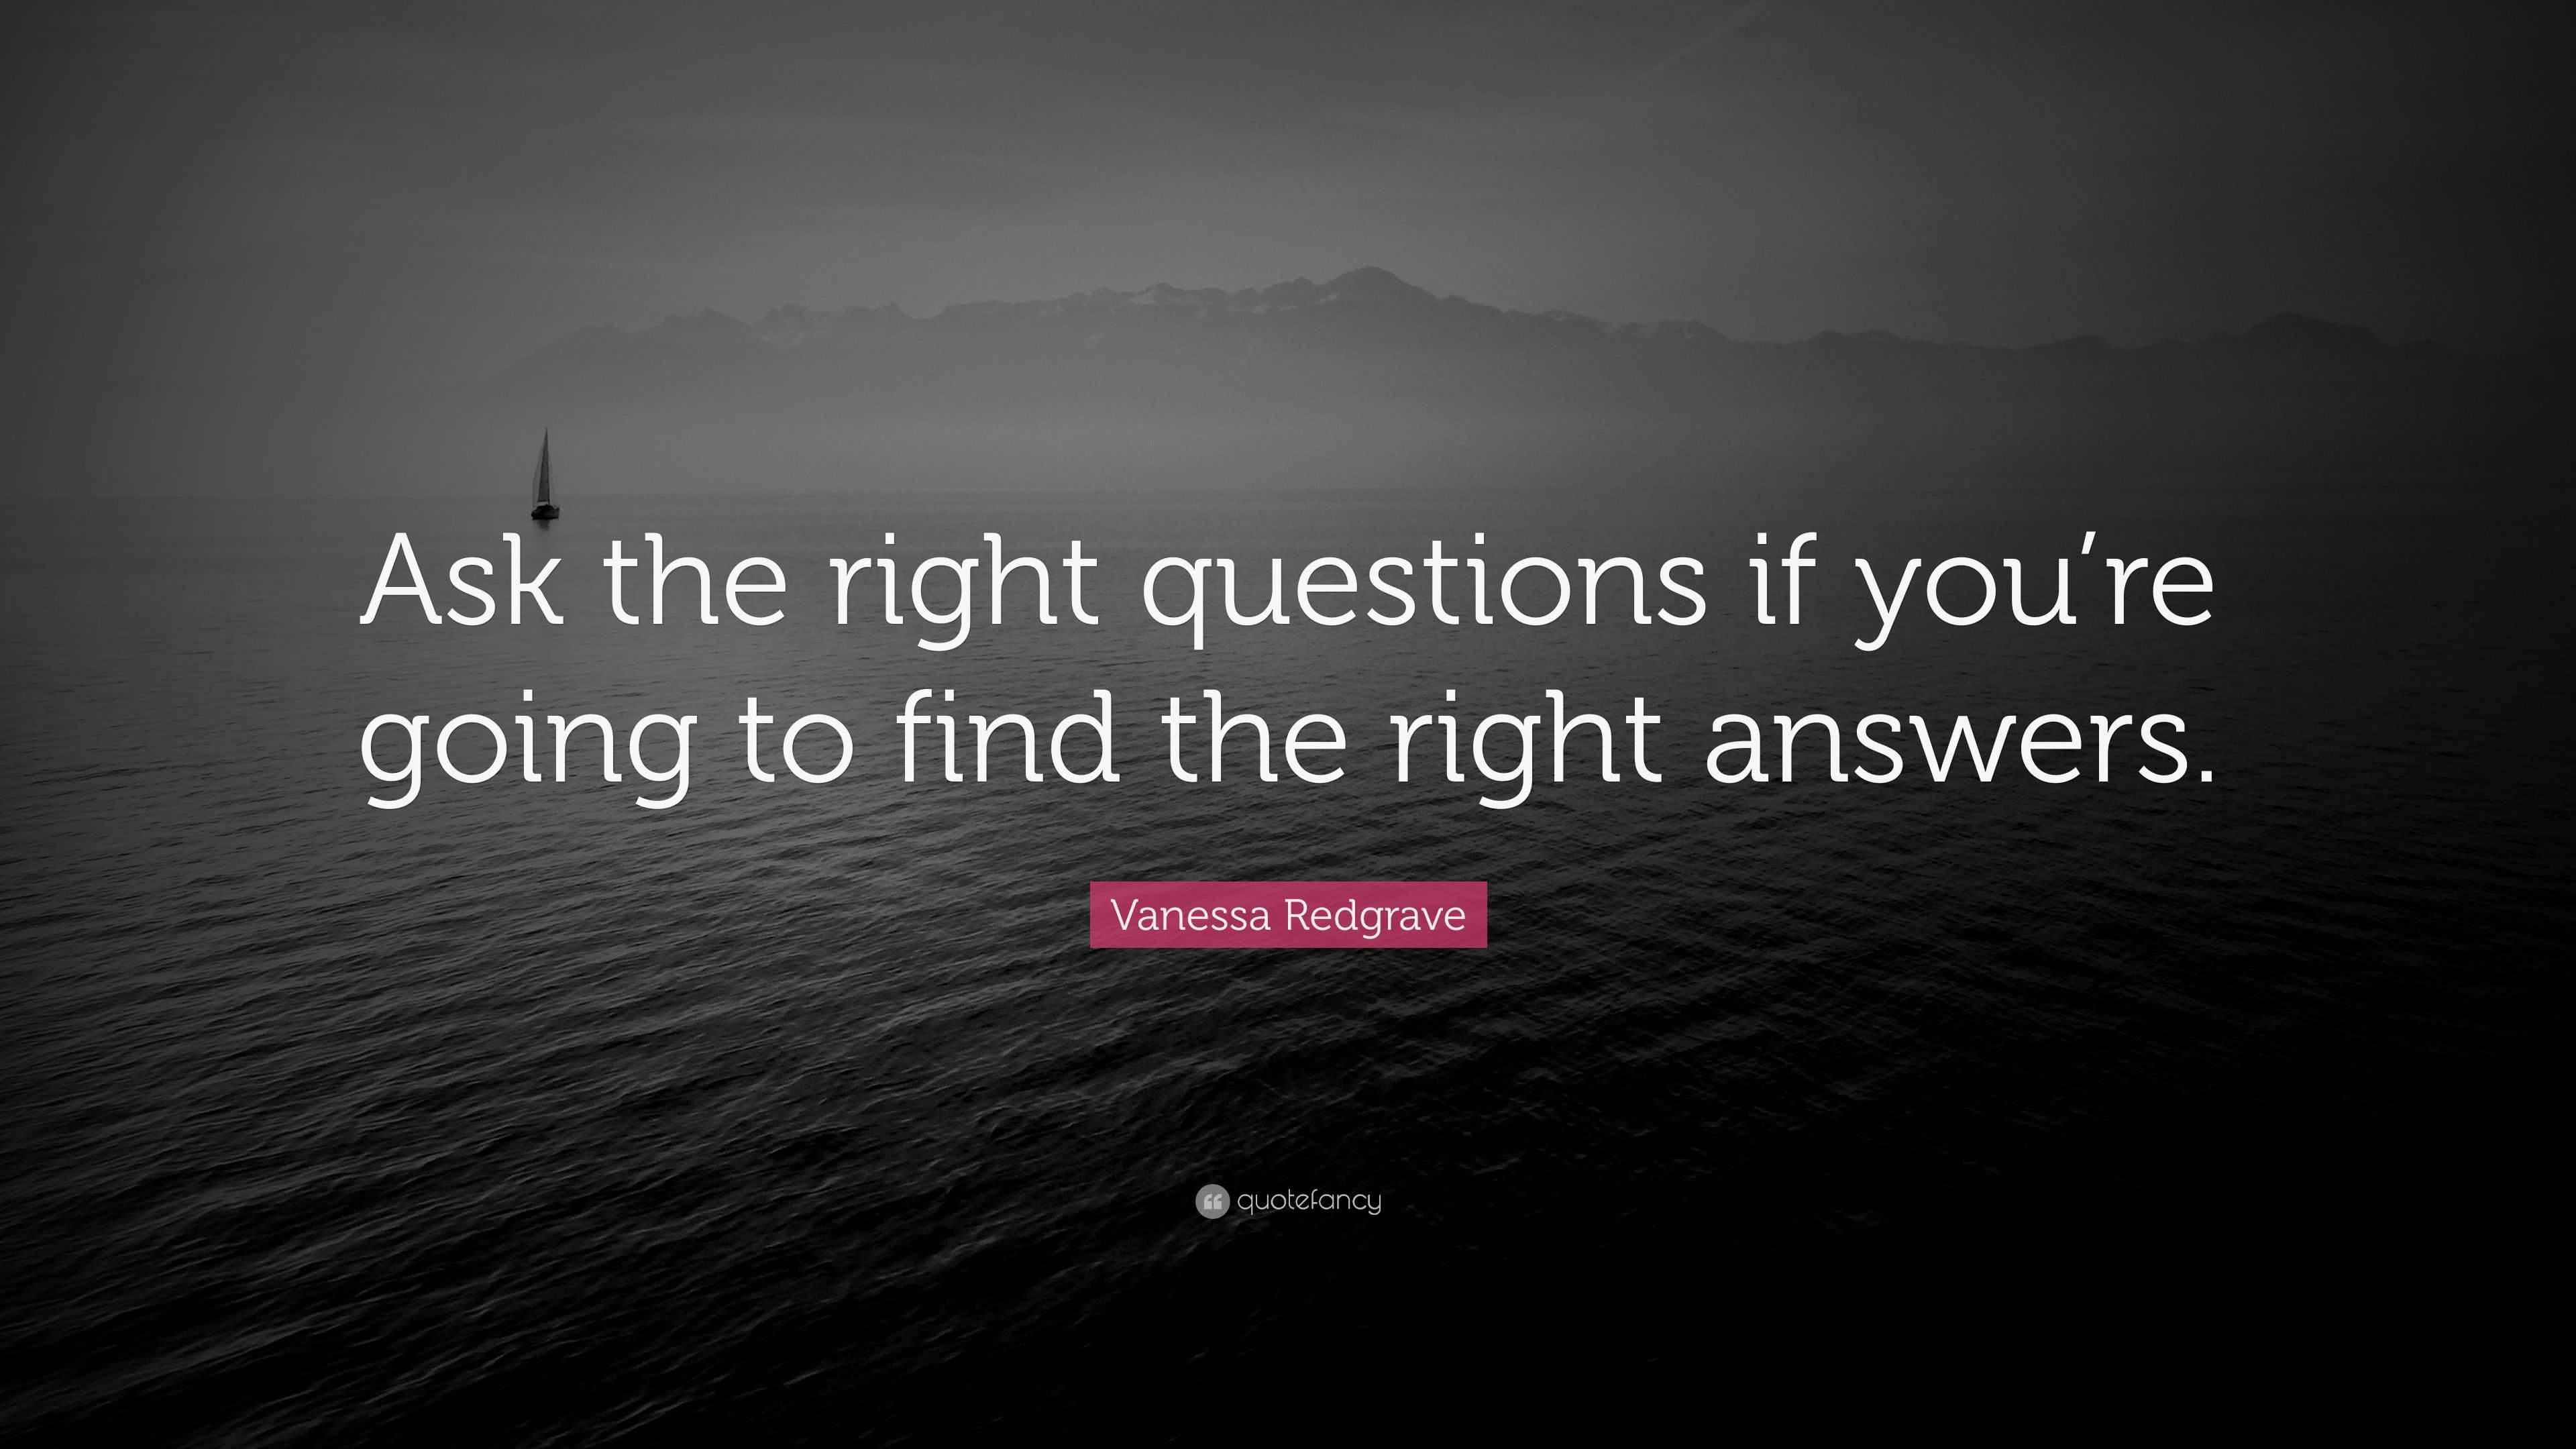 Vanessa Redgrave Quote: “Ask the right questions if you’re going to ...